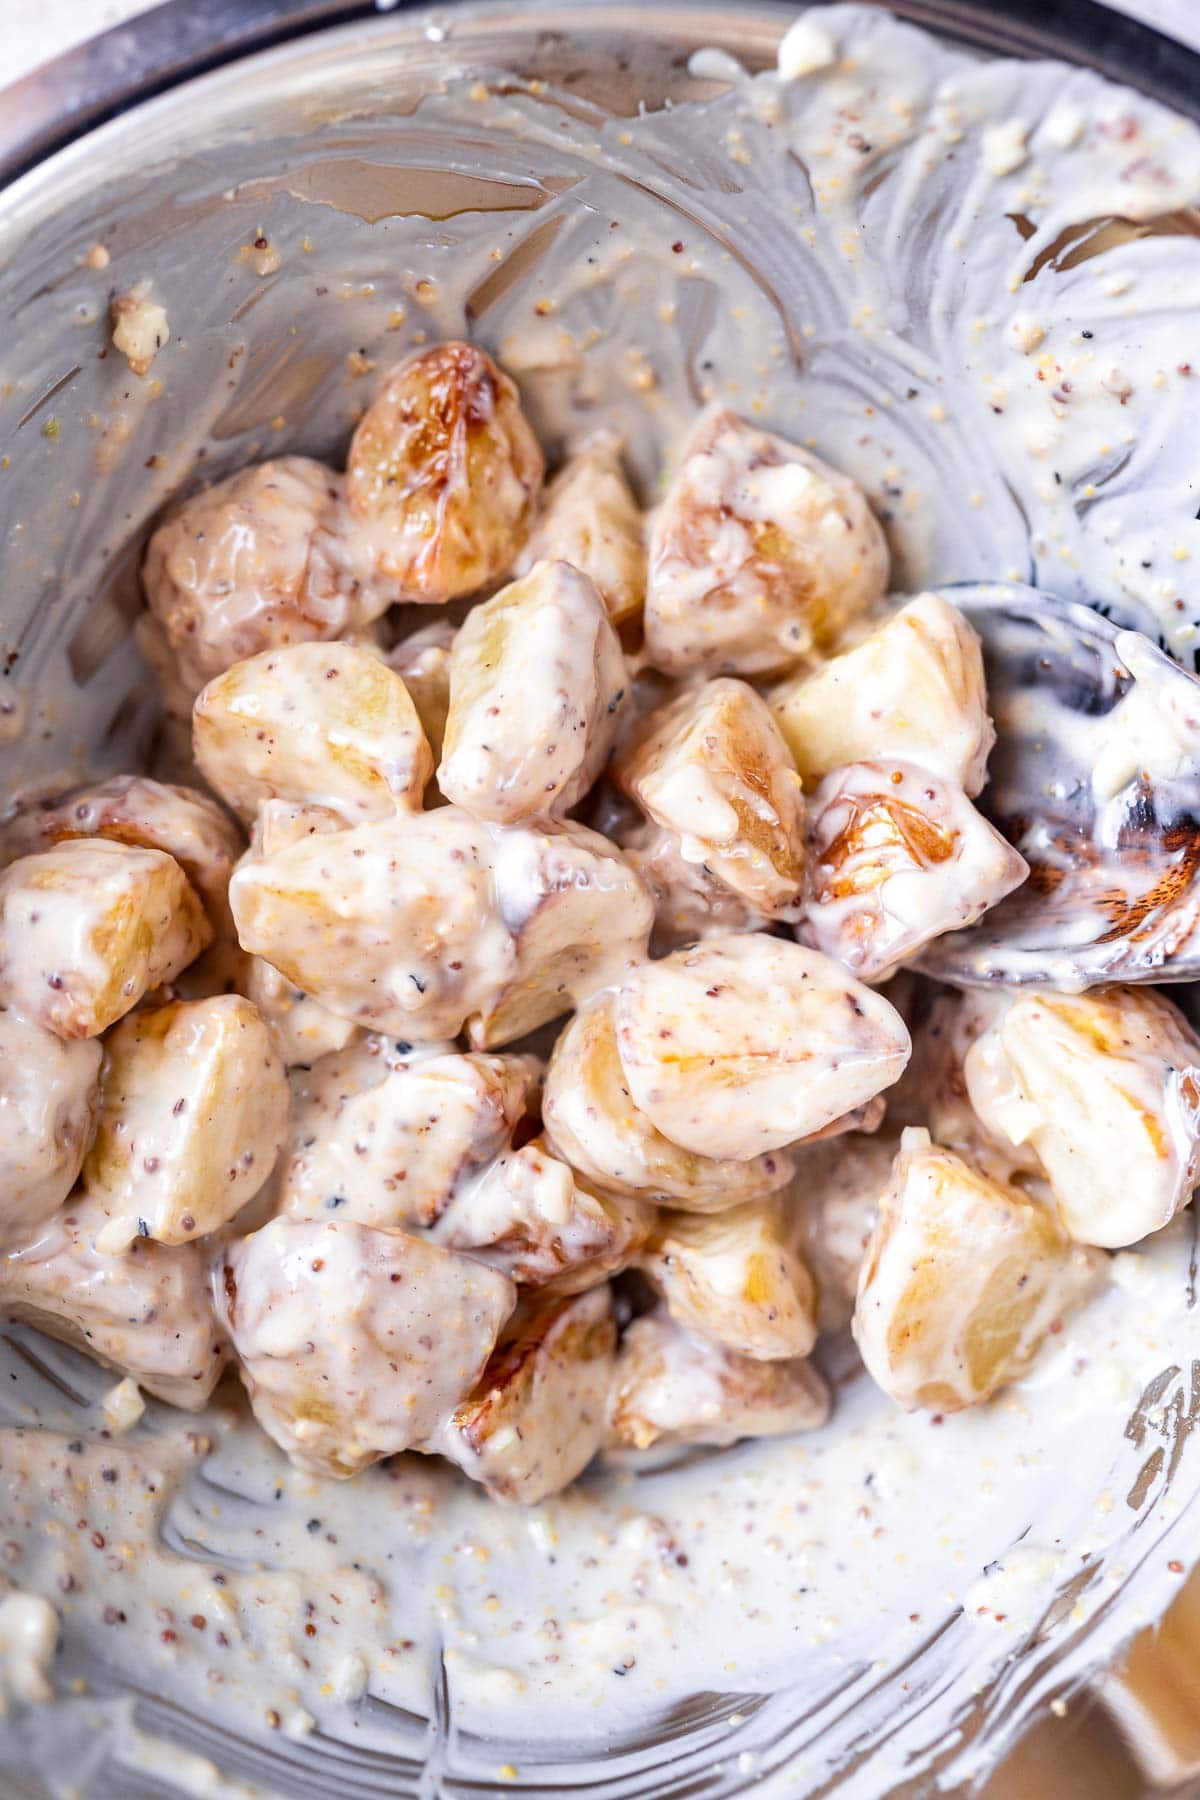 Roasted potatoes tossed in a creamy white dressing.